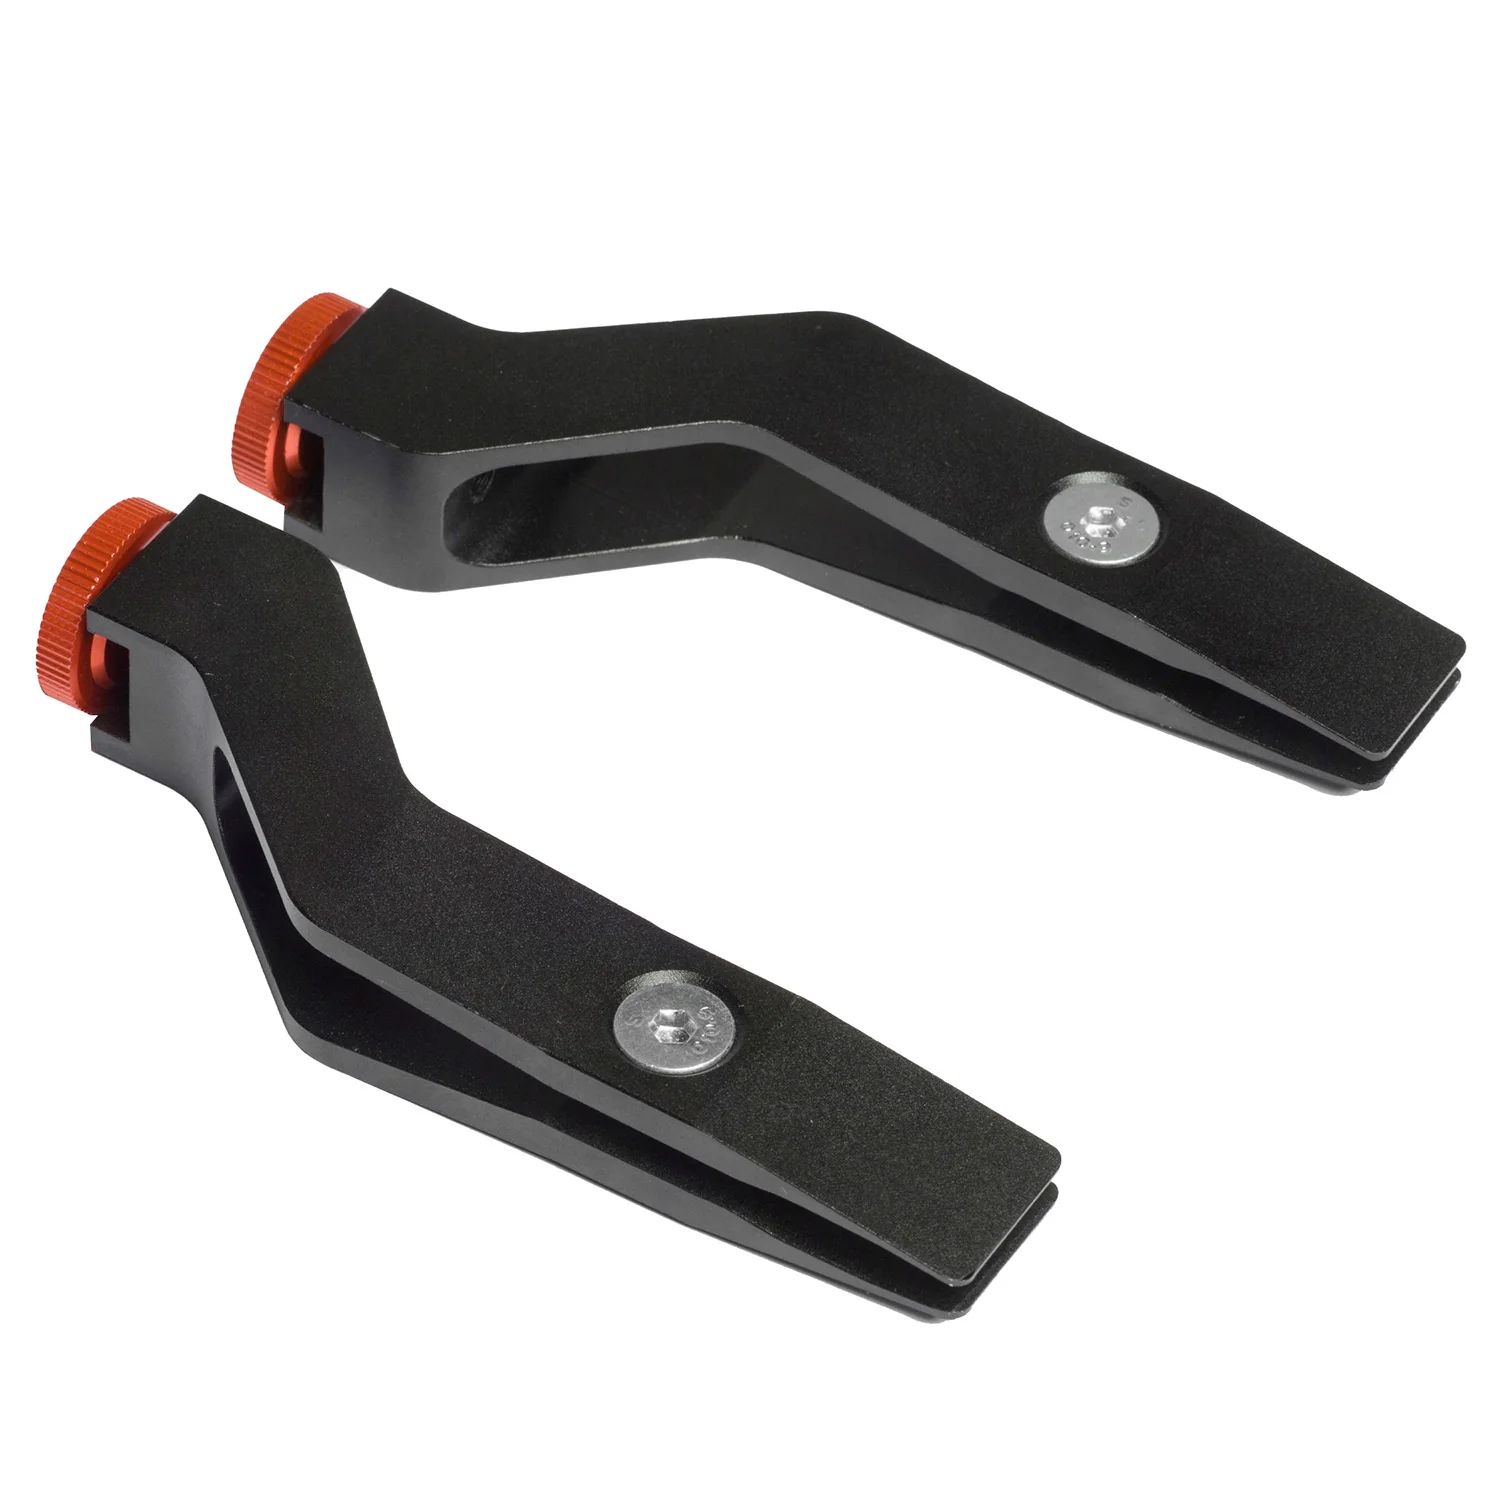 Hapstone R2 Opti Clamps (Set of 2) Questions & Answers